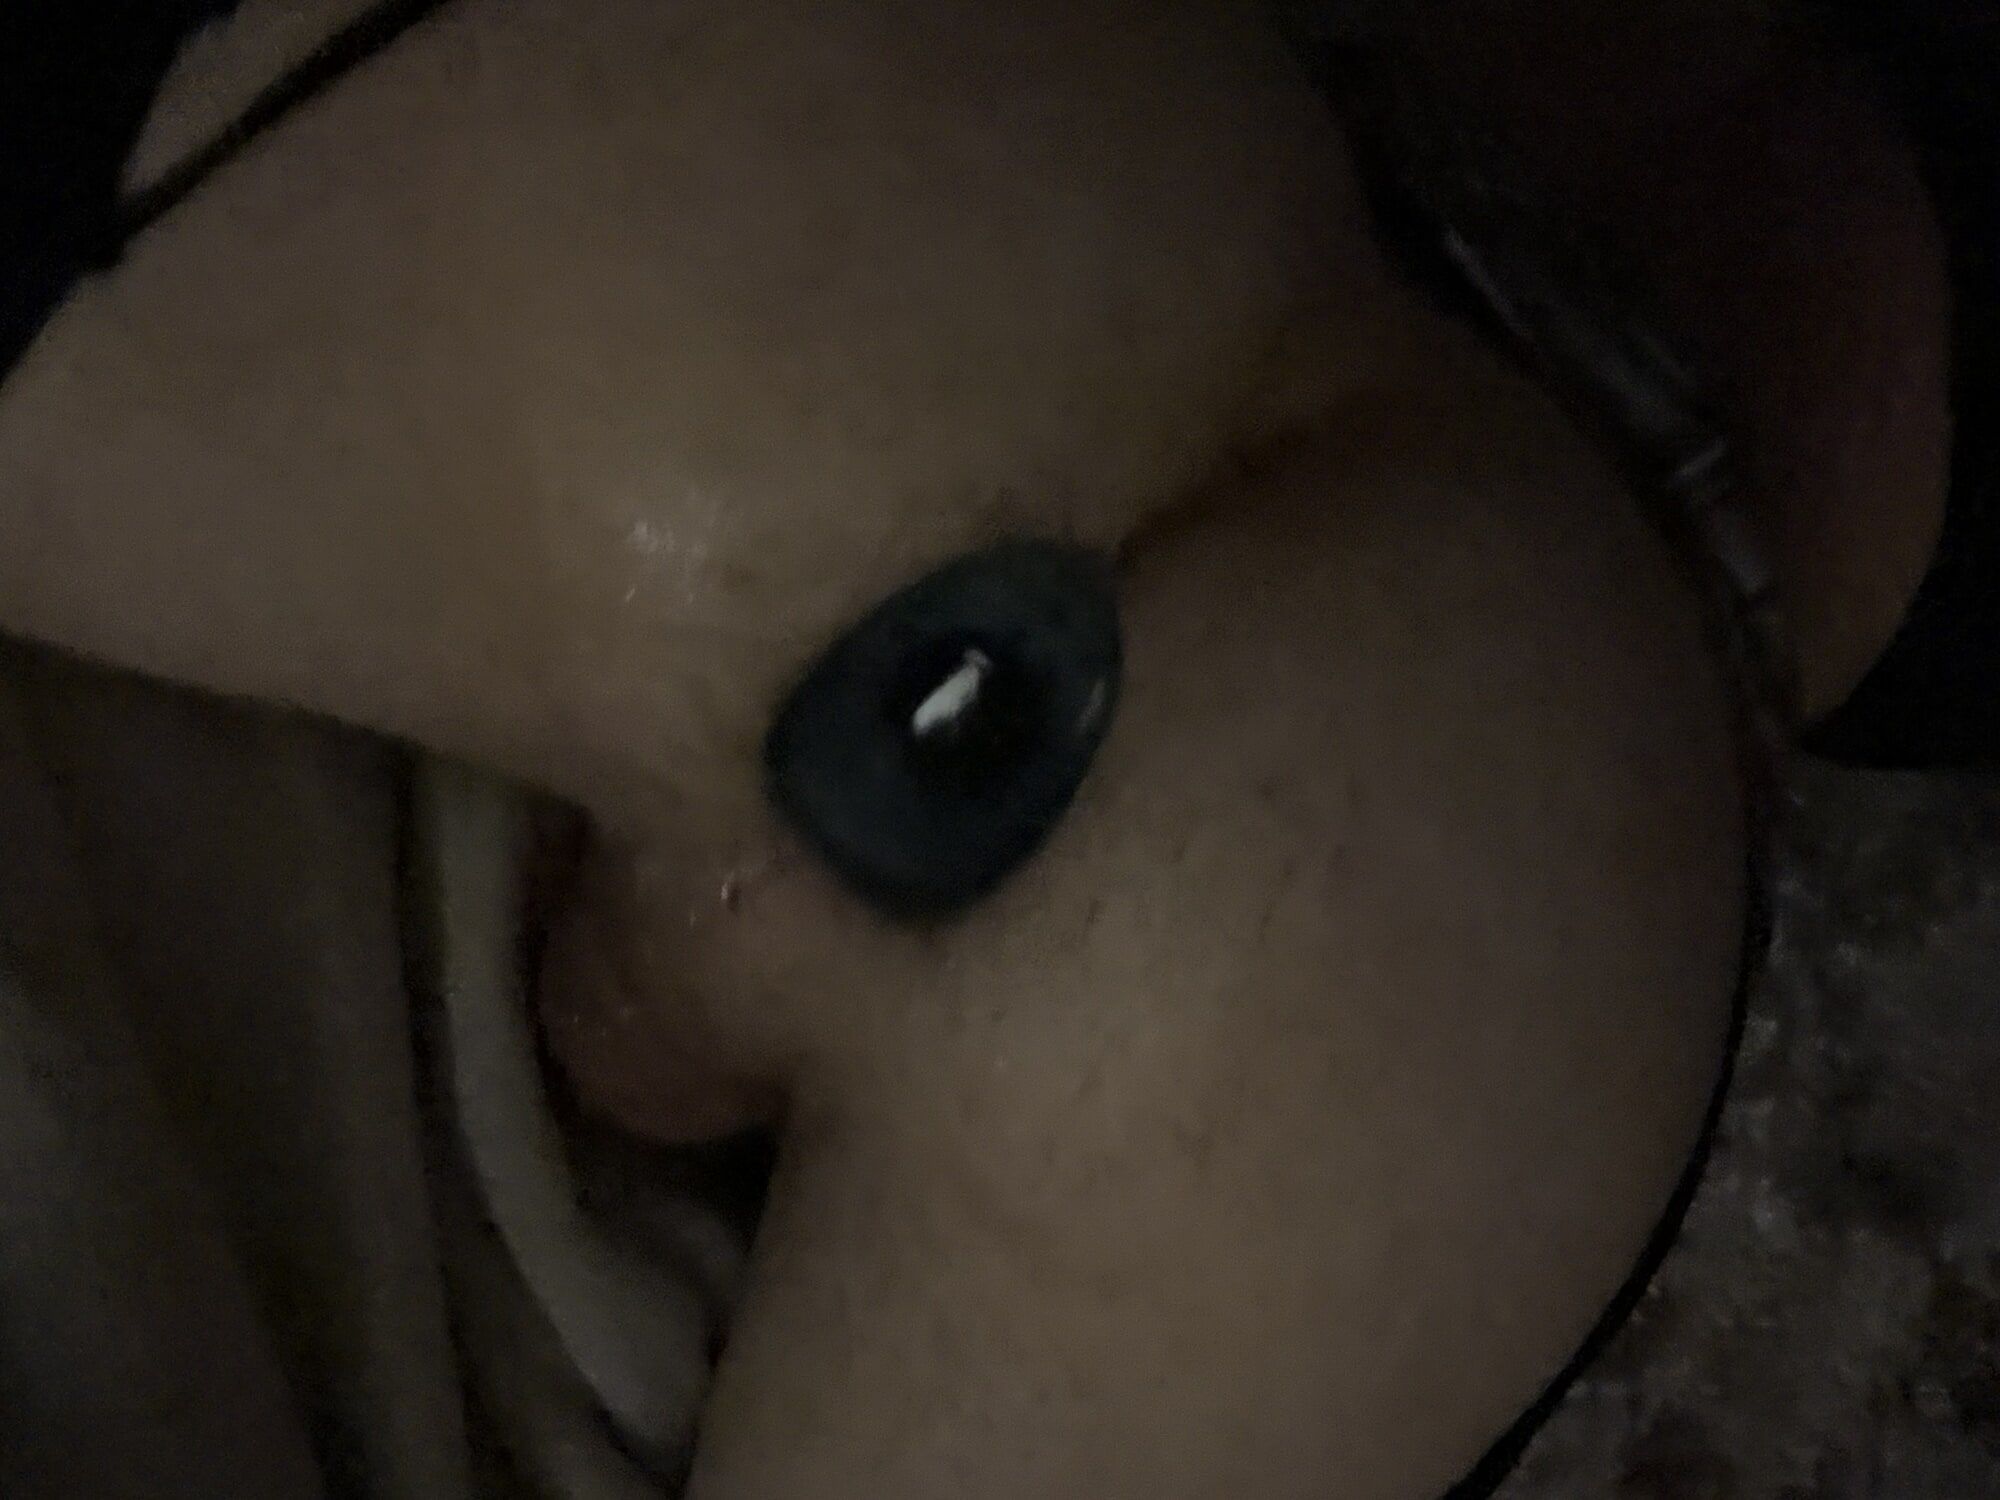 Some fun shots of me cum see #3